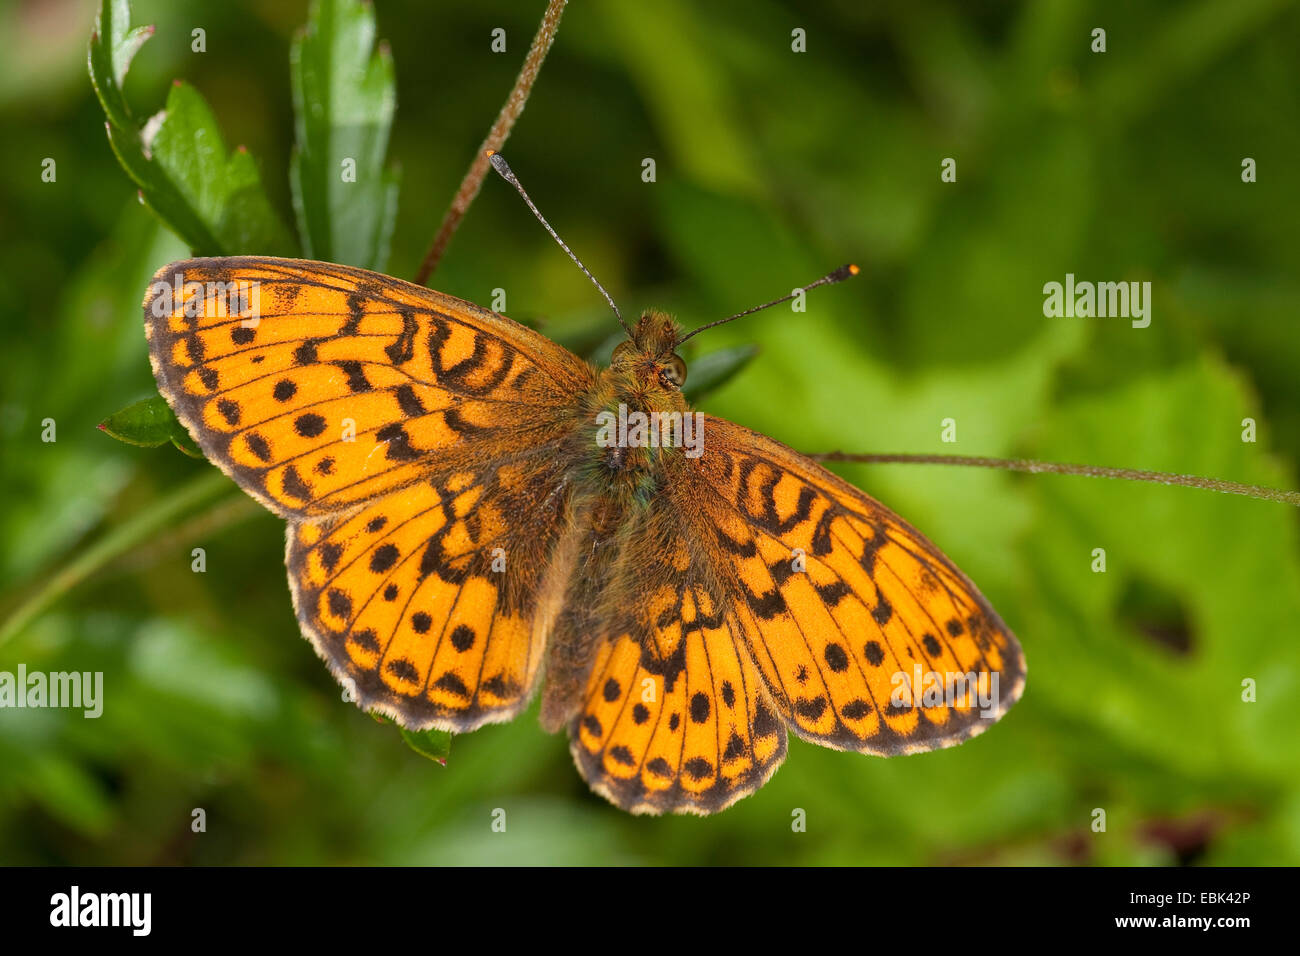 lesser marbled fritillary (Brenthis ino), sitting on a leaf, Germany Stock Photo